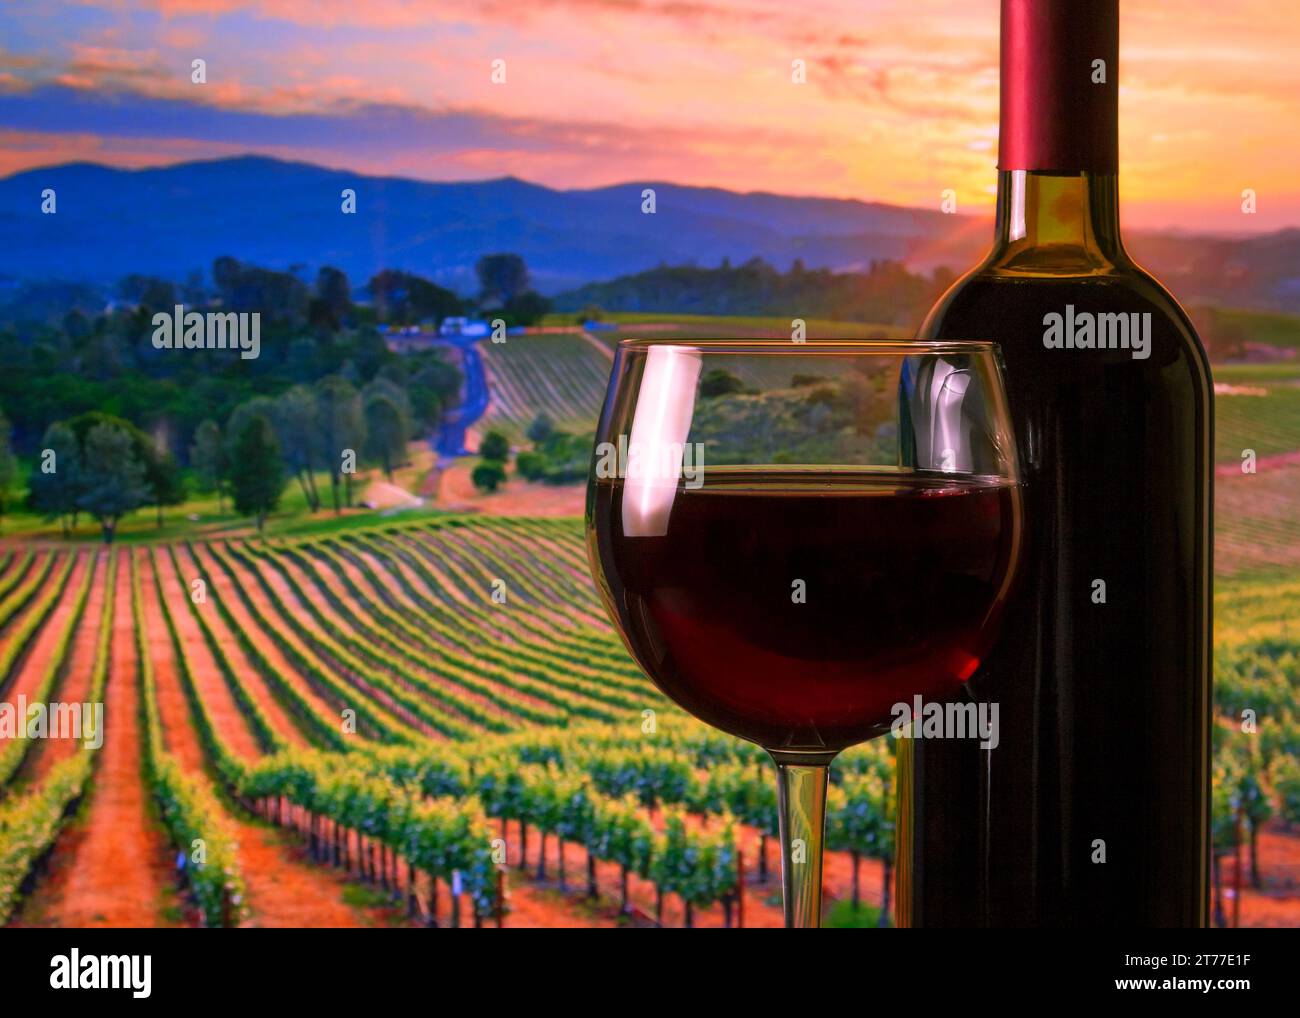 glass with red wine and bottle on the vineyards background, atmosphere sunset Stock Photo